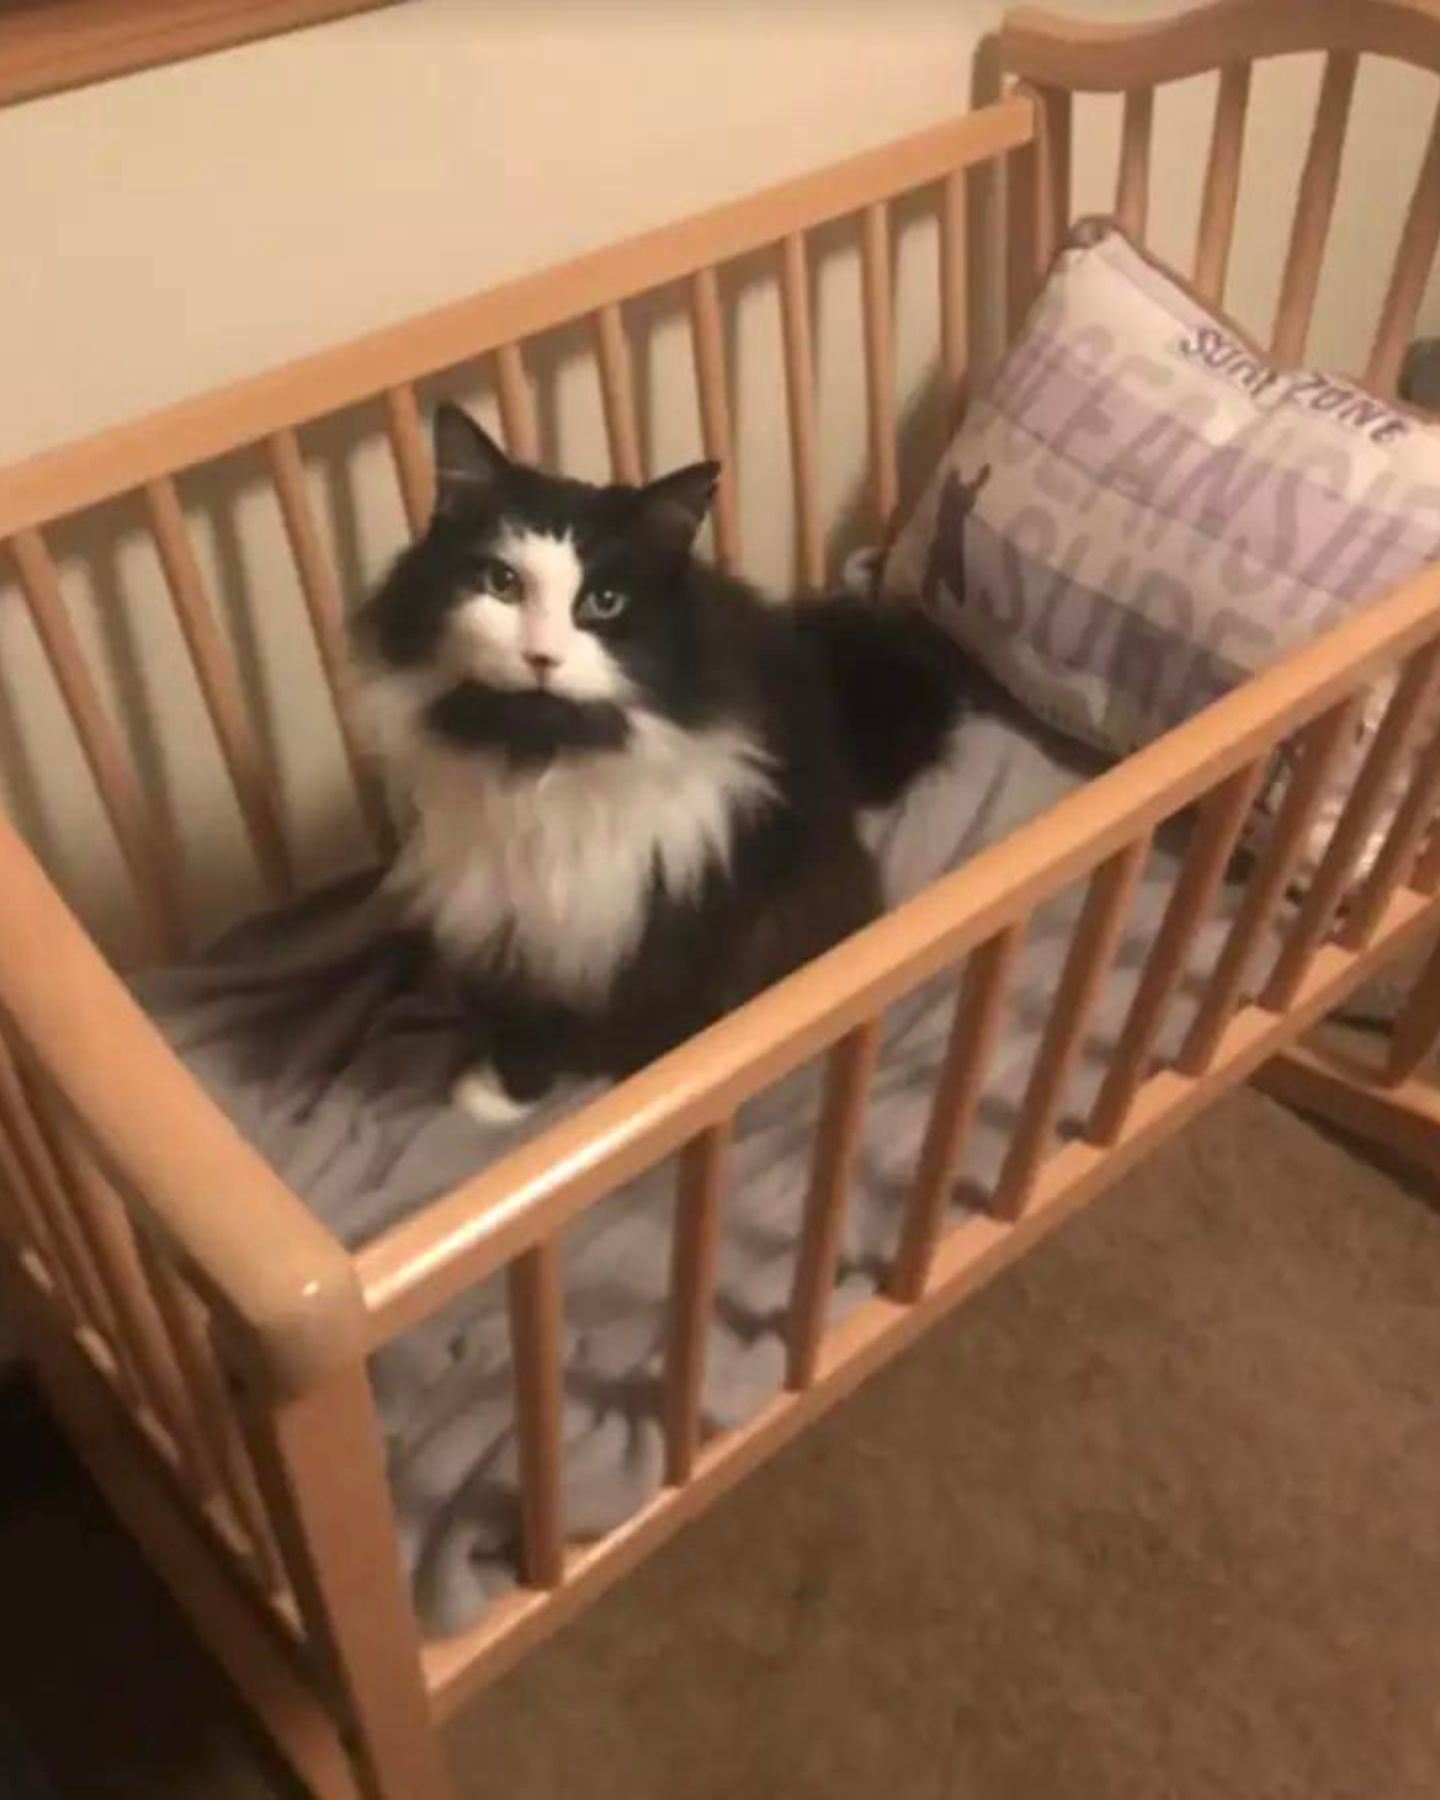 a cat in a baby crib